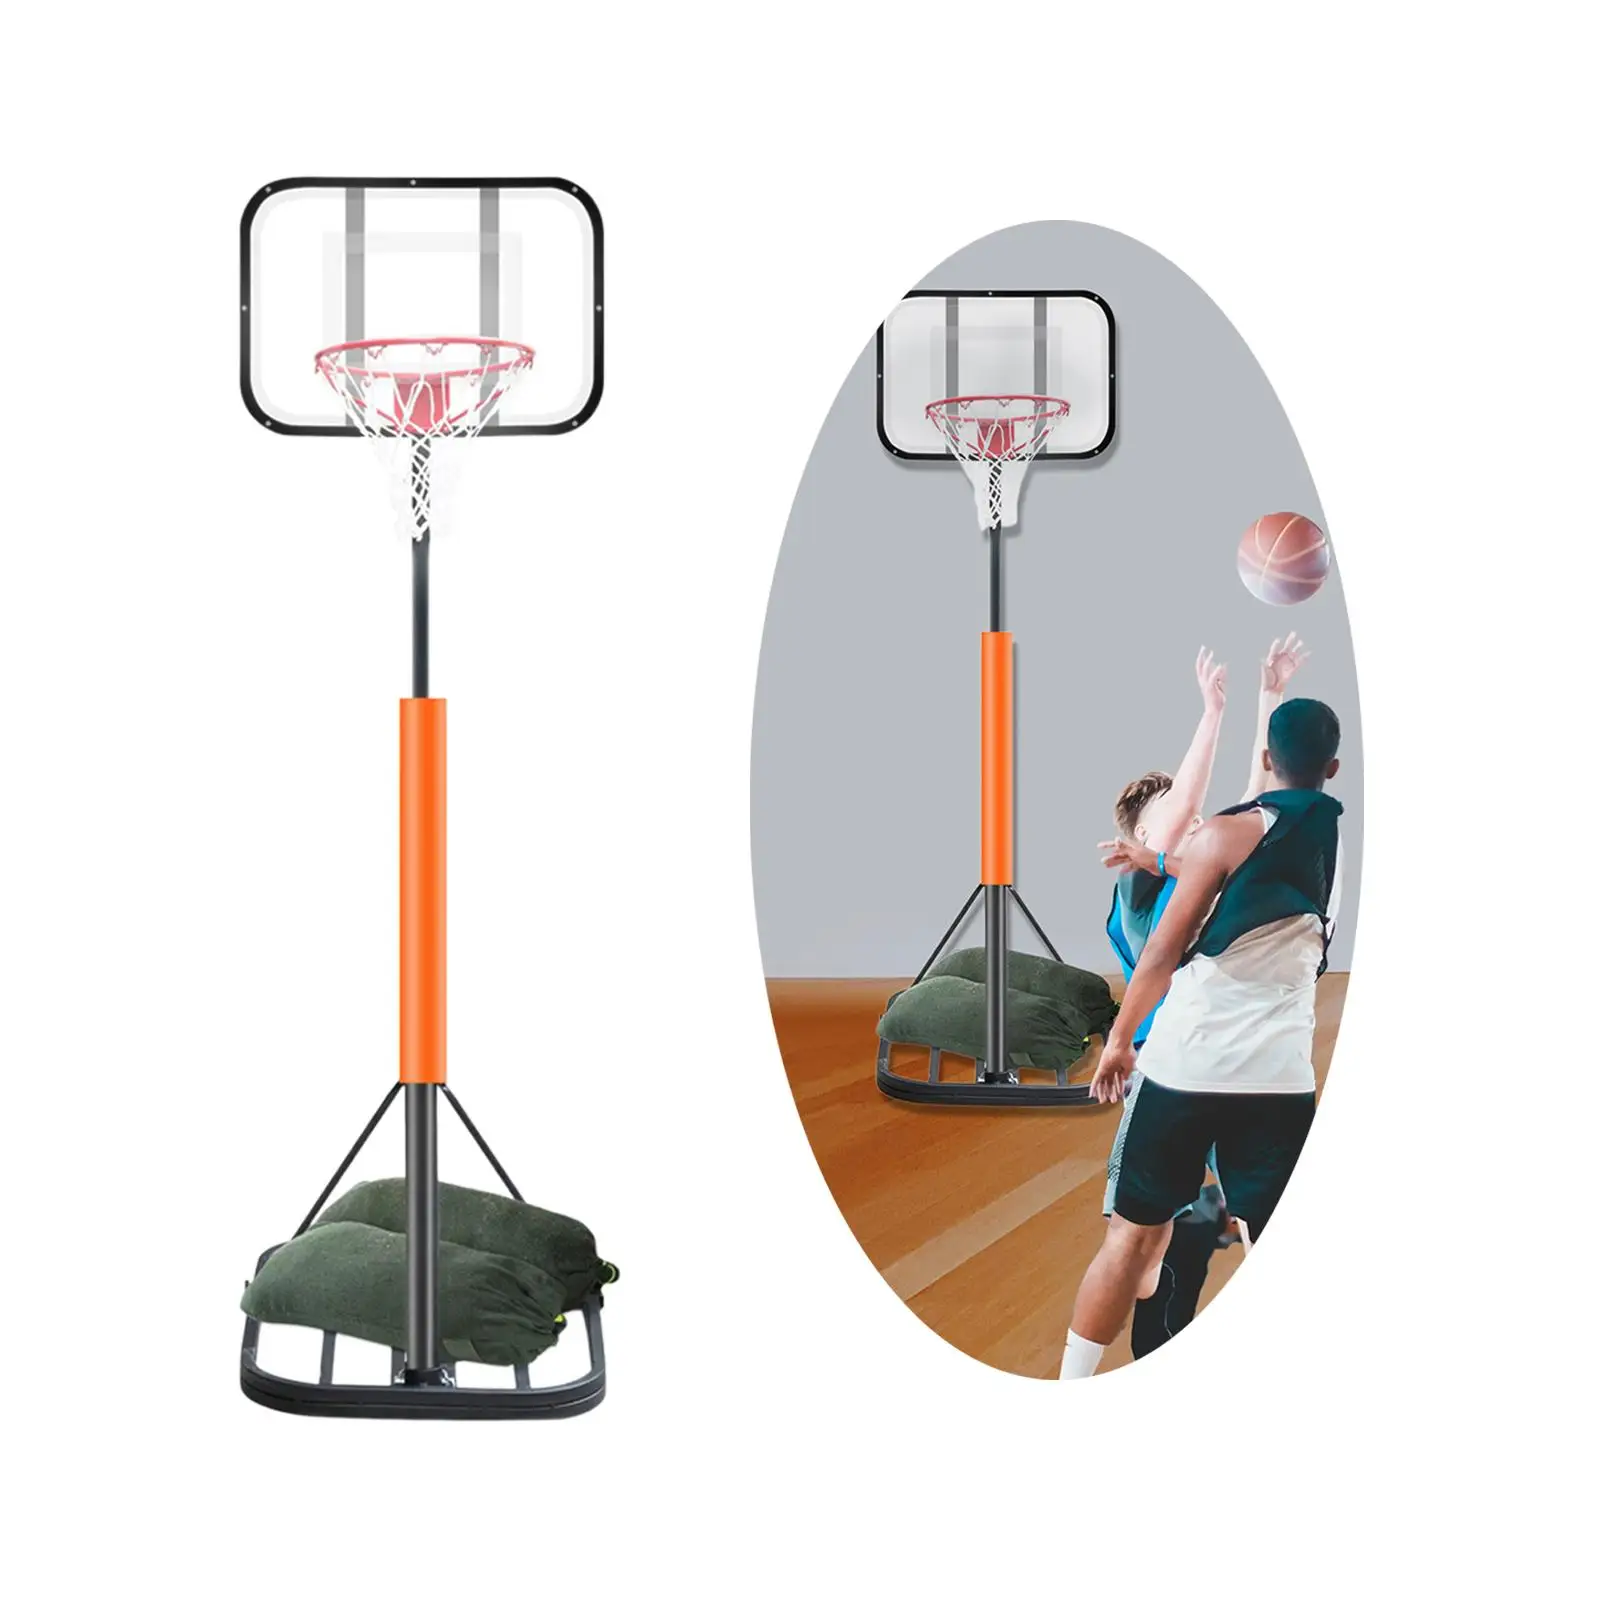 Portable Basketball Hoop Stand Adjustable Indoor Outdoor Backboard System Basketball Goal for Yard Youth Children Teenagers